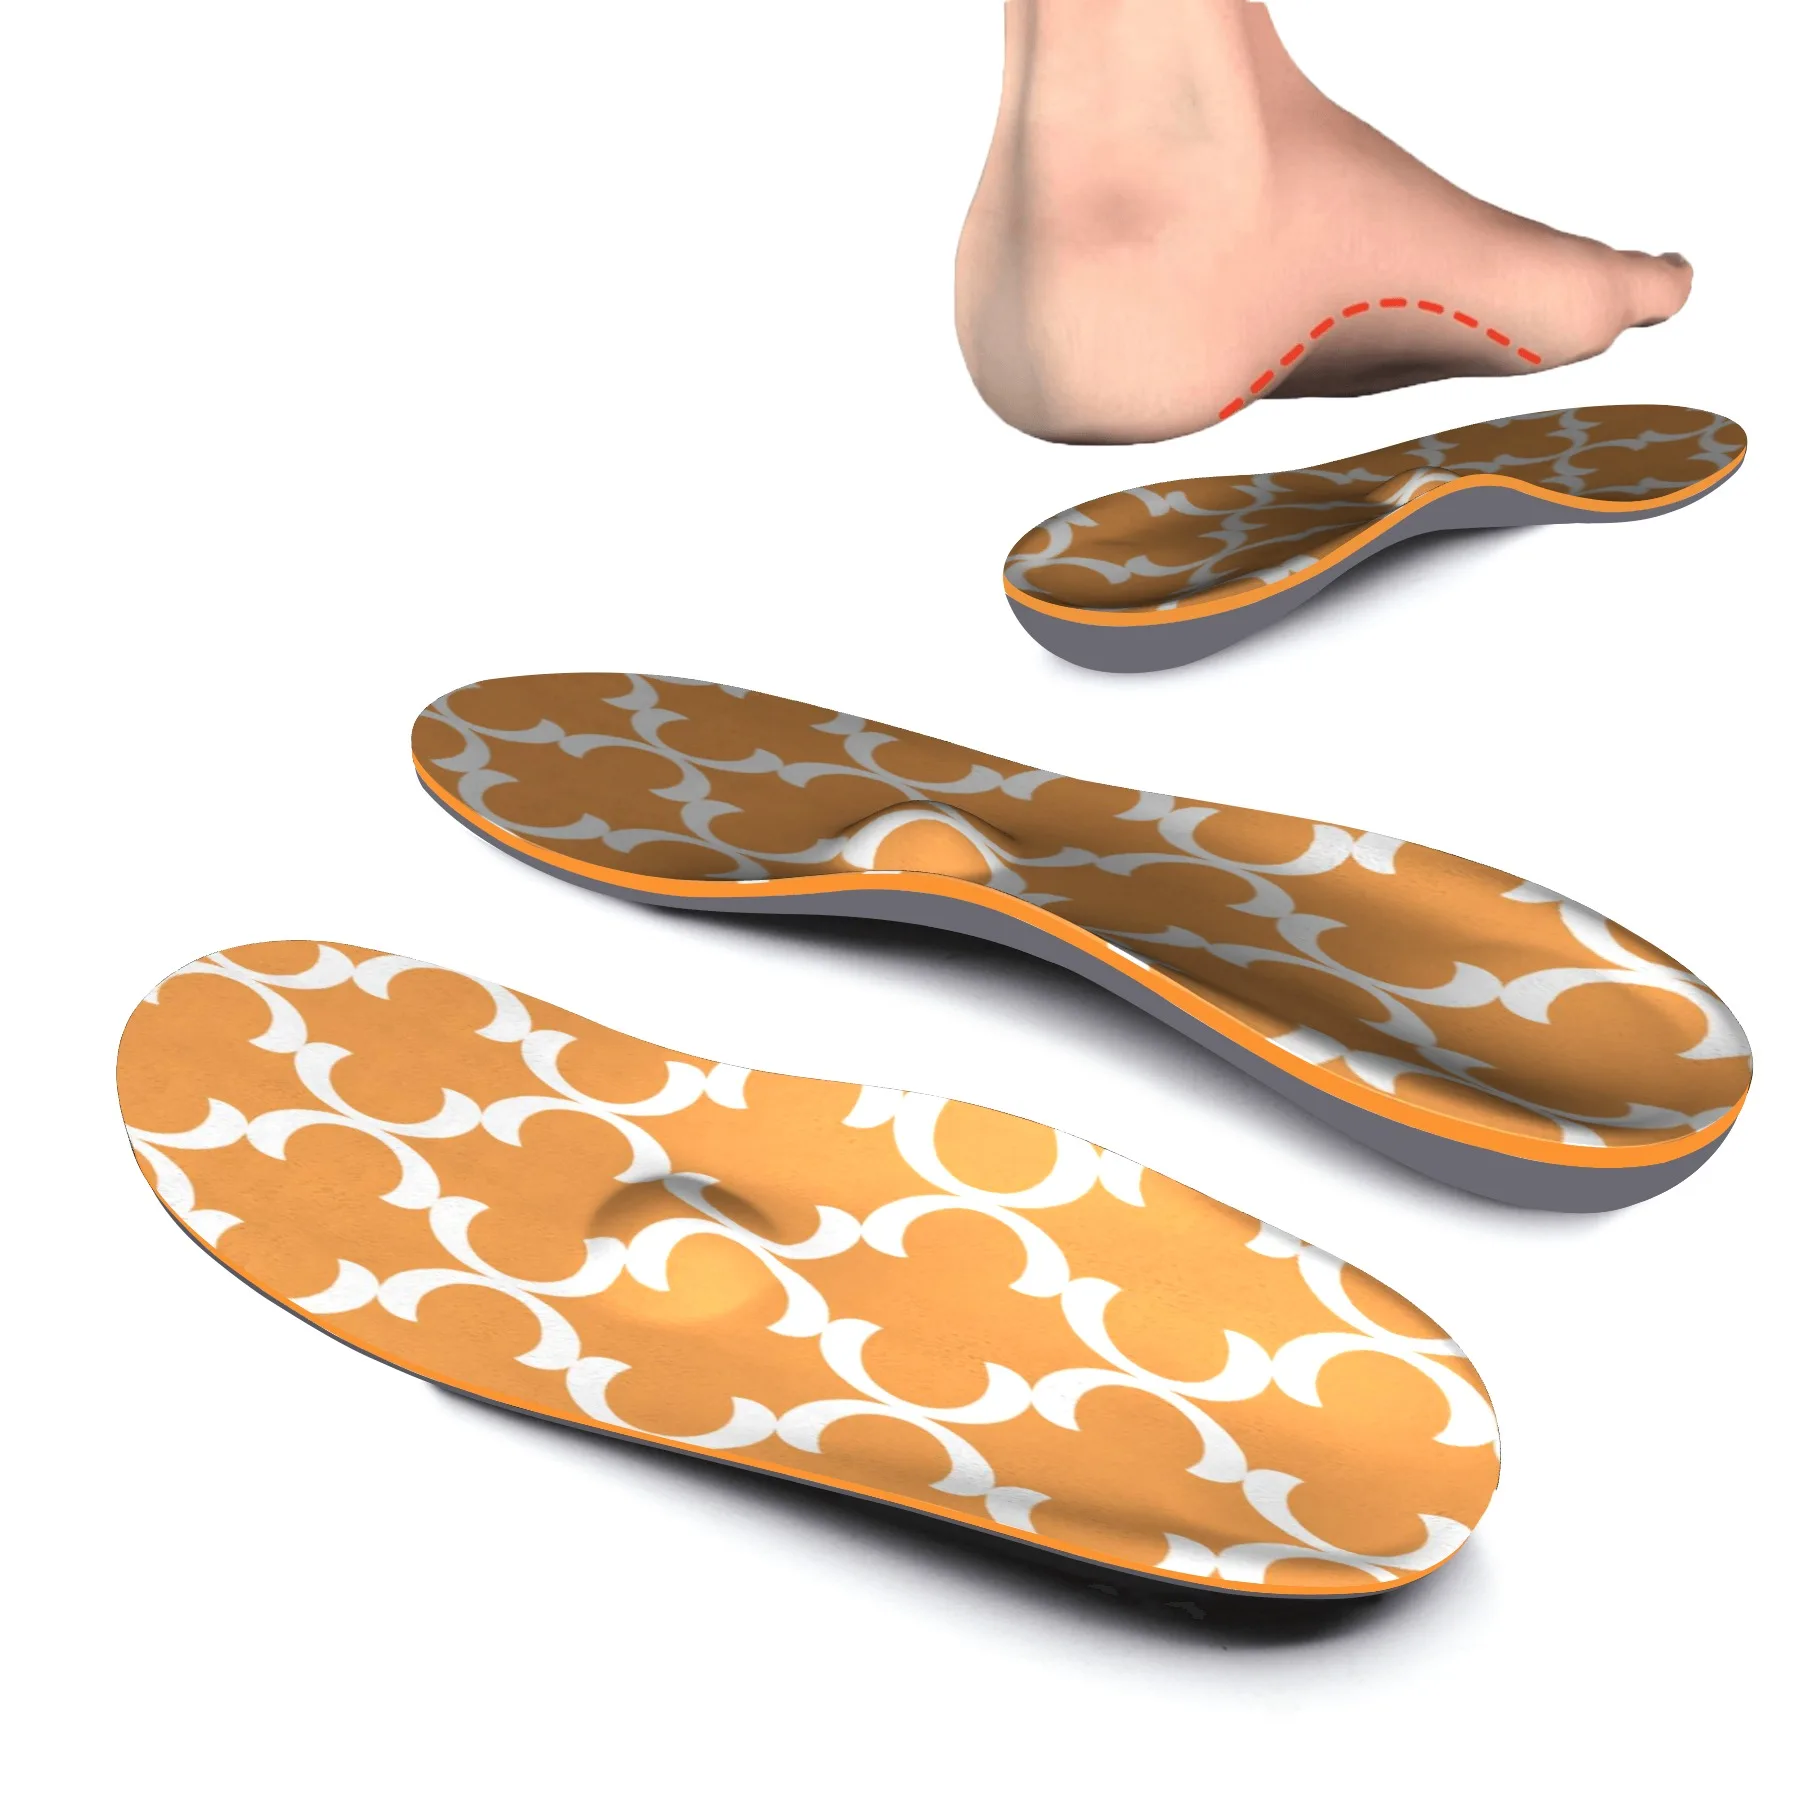 Orange Design Orthopedic Inserts with Arch Support-Best Insoles Relief Foot Pain for Plantar Fasciitis,Heel Spurst&Sore Foot